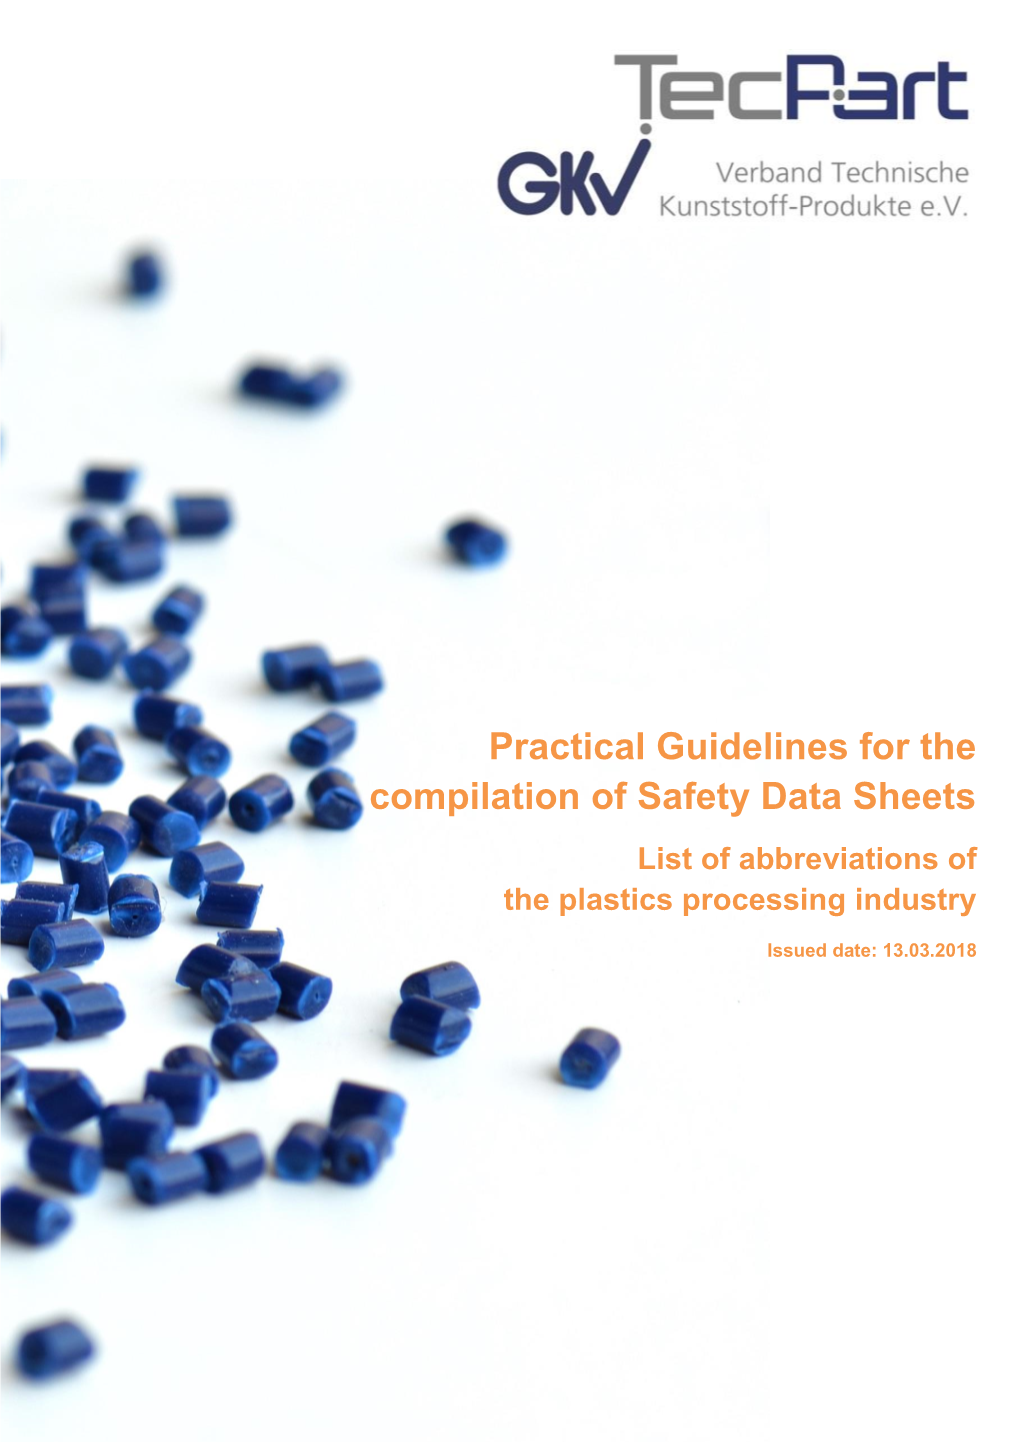 Practical Guidelines for the Compilation of Safety Data Sheets List of Abbreviations of the Plastics Processing Industry